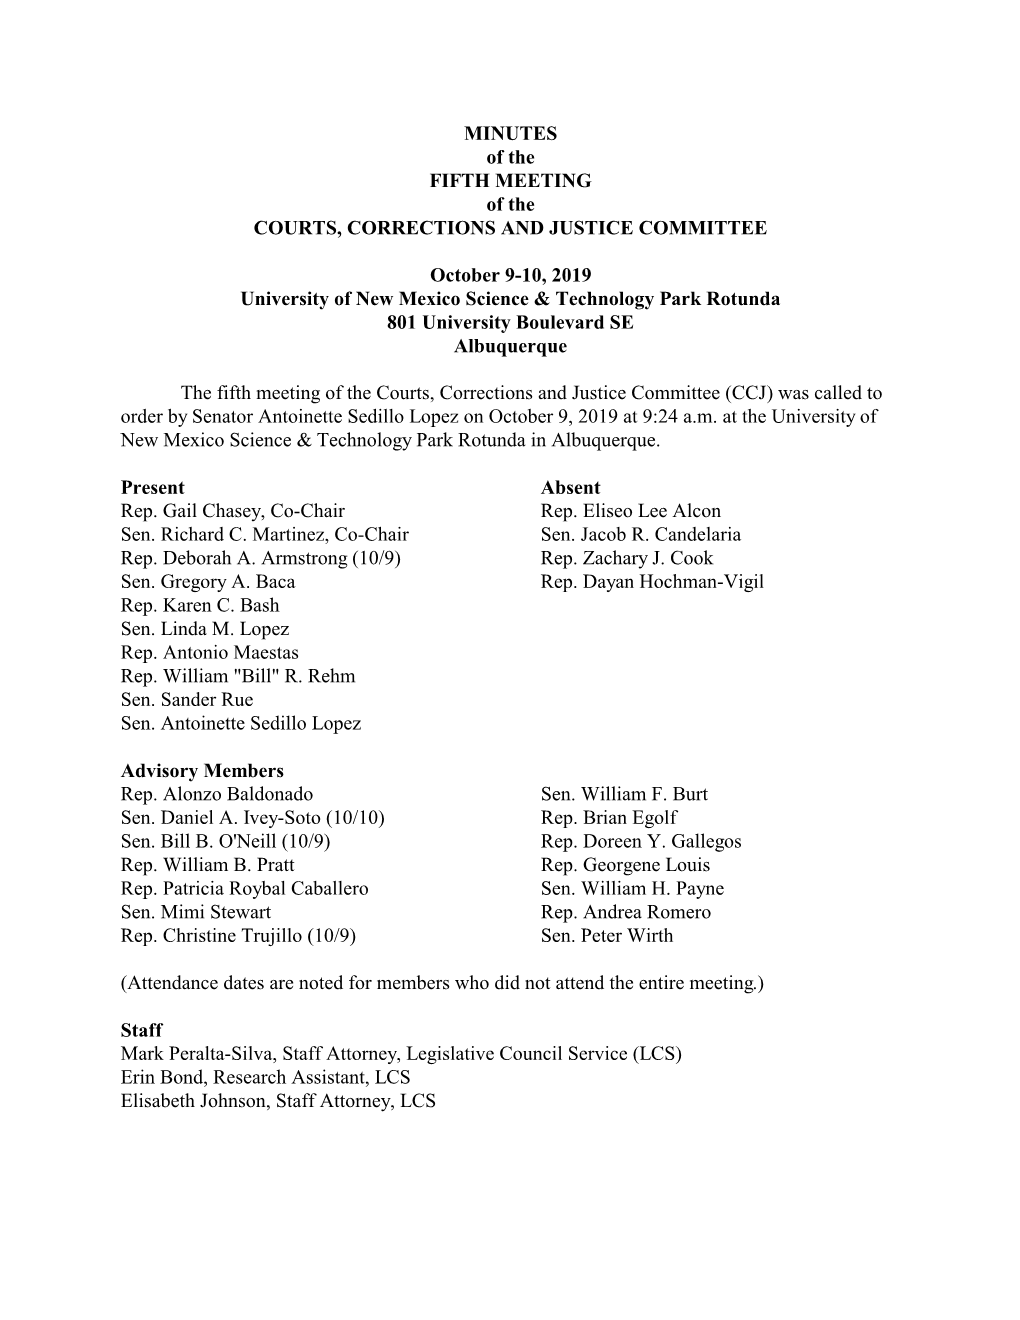 MINUTES of the FIFTH MEETING of the COURTS, CORRECTIONS and JUSTICE COMMITTEE